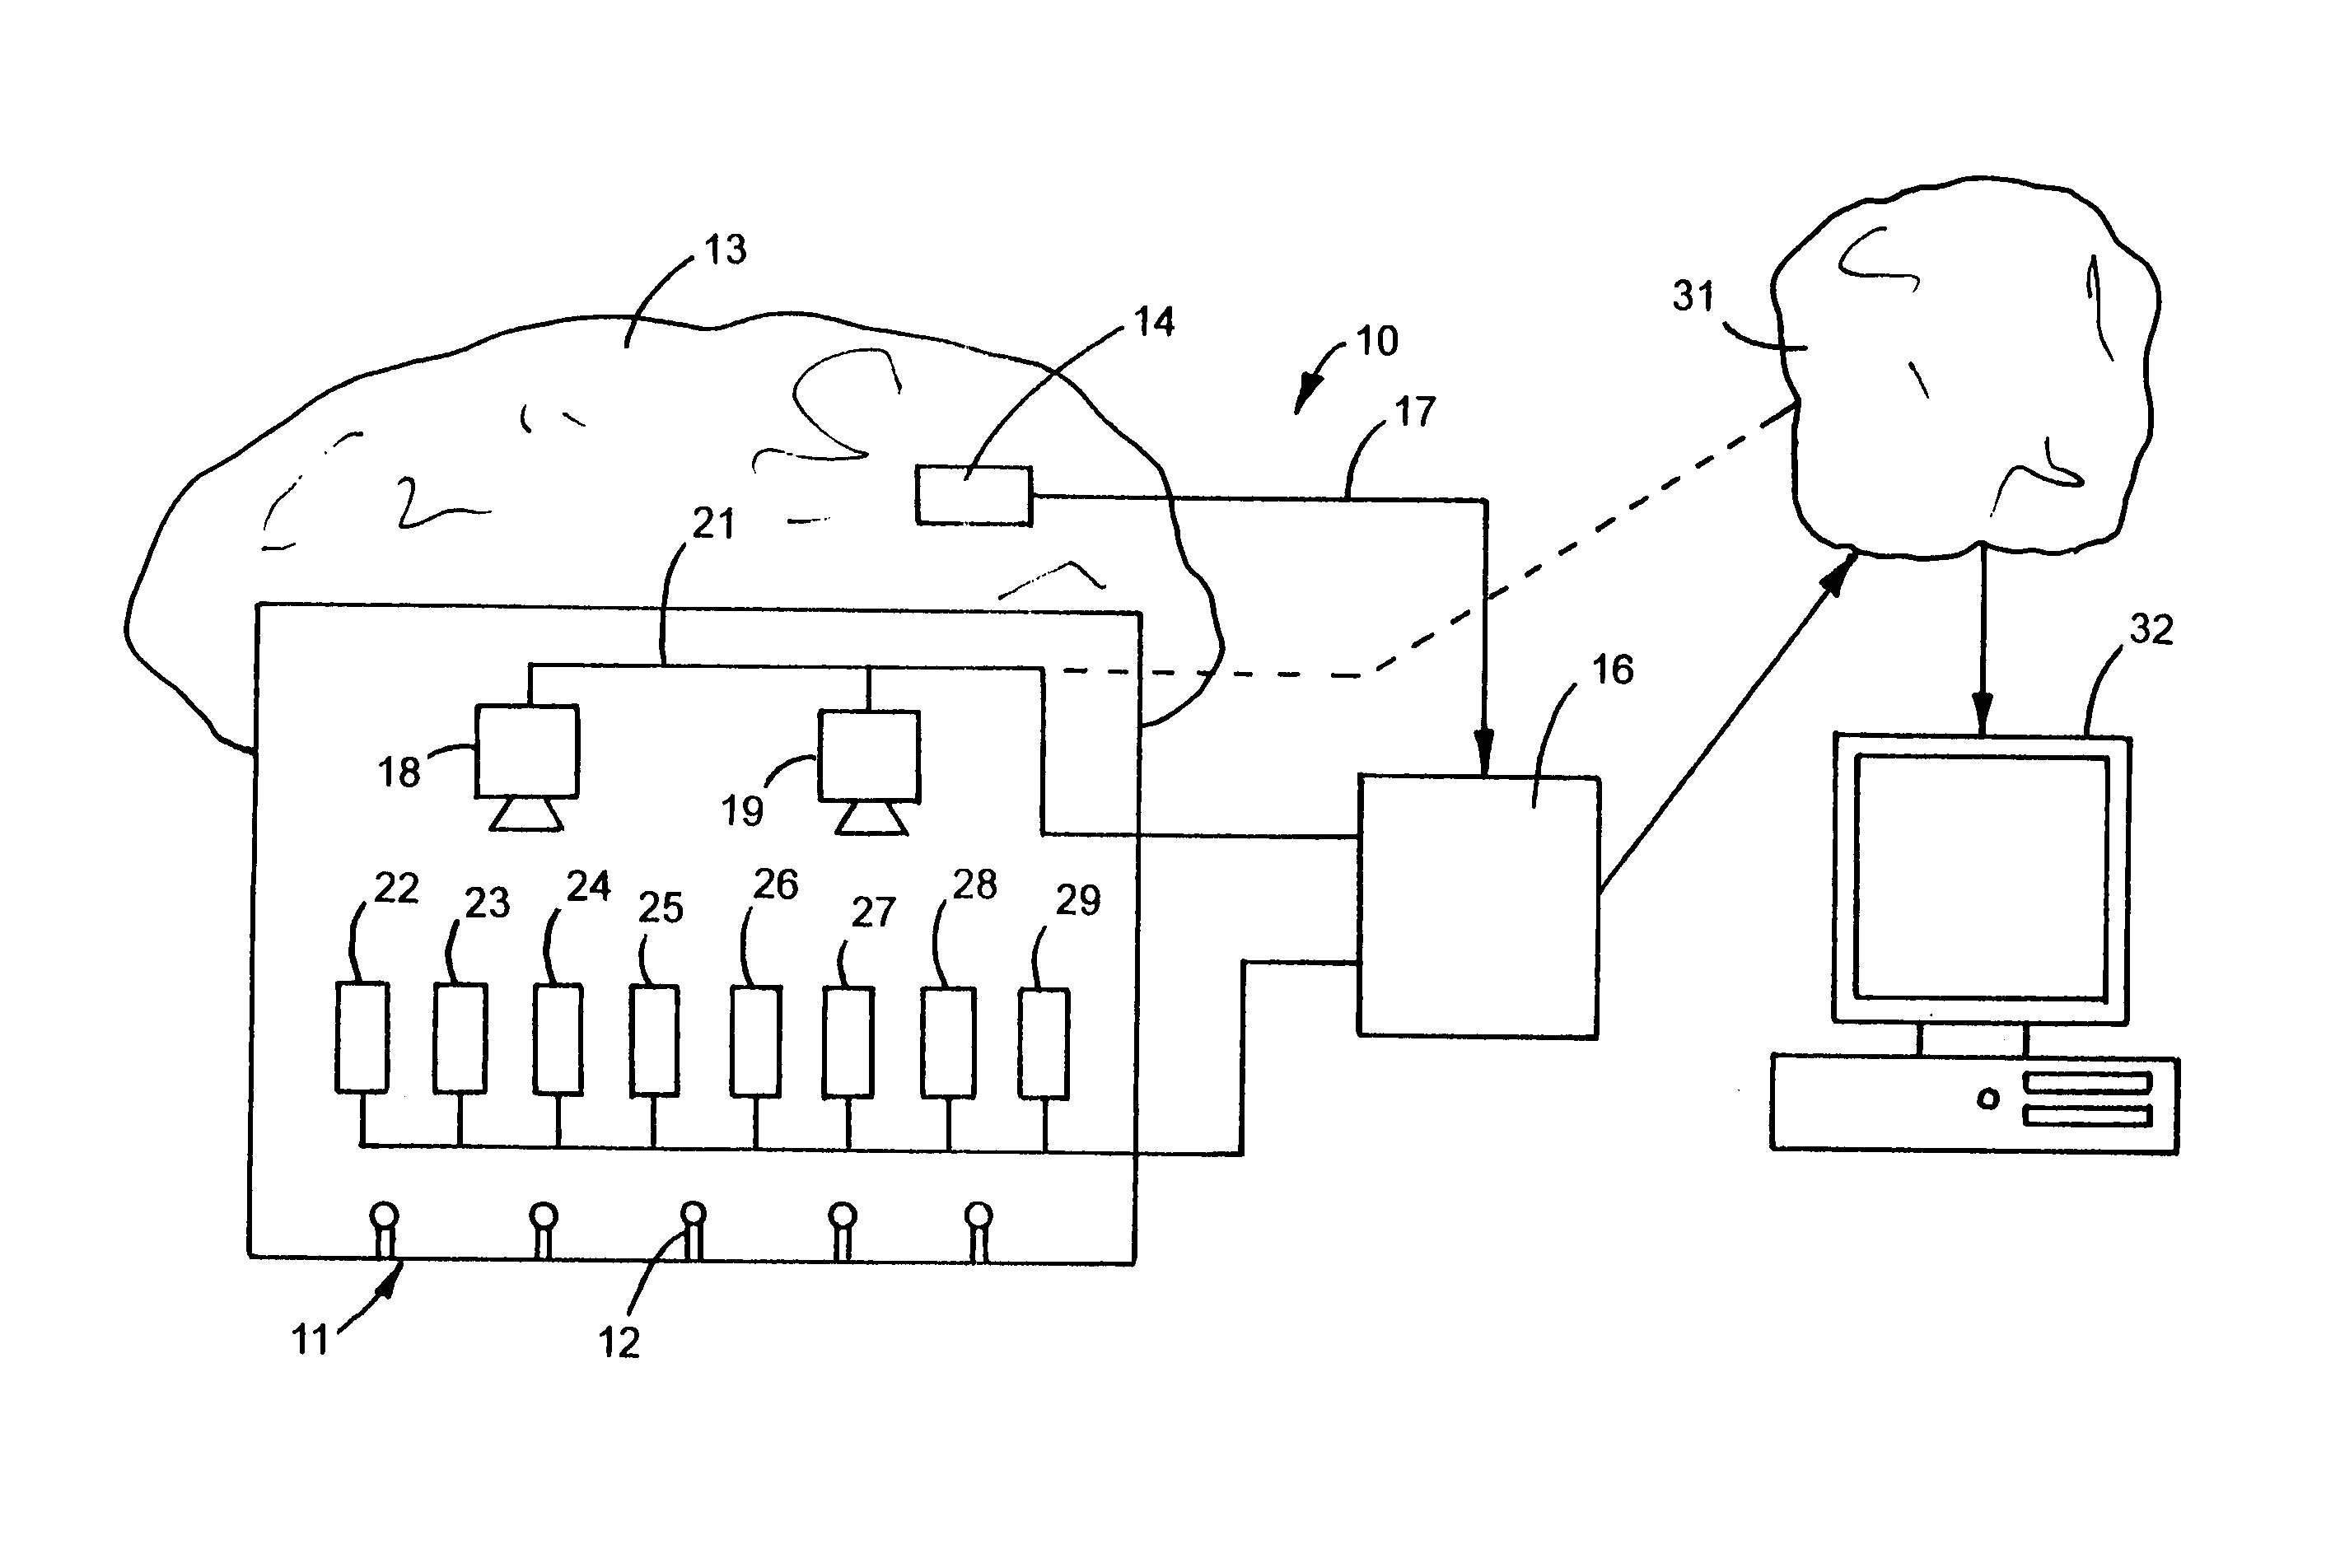 Method and apparatus for monitoring poultry in barns